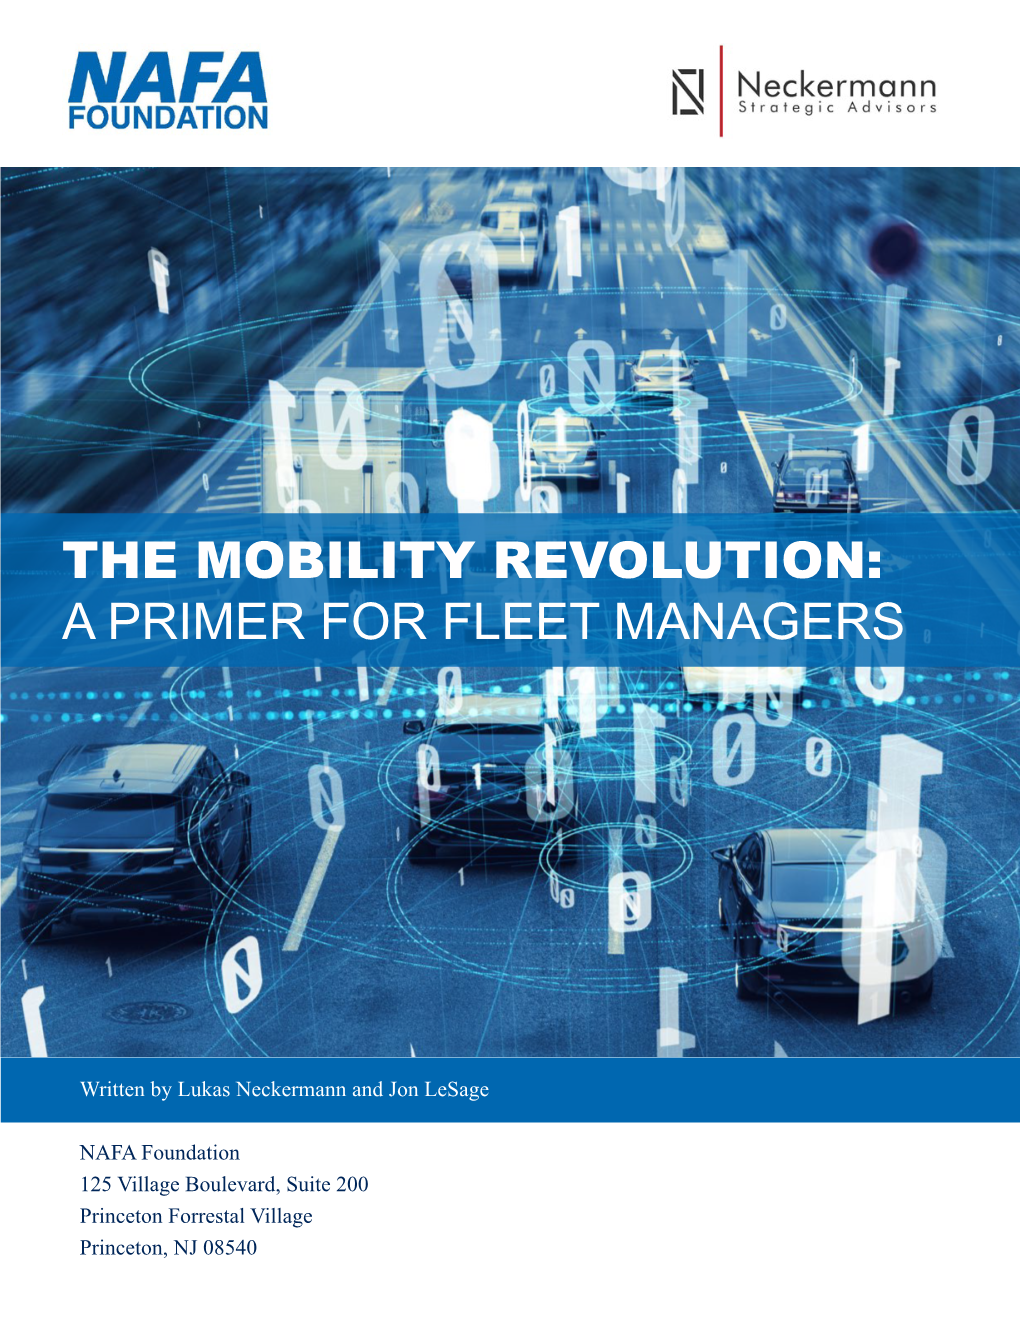 A Primer for Fleet Managers